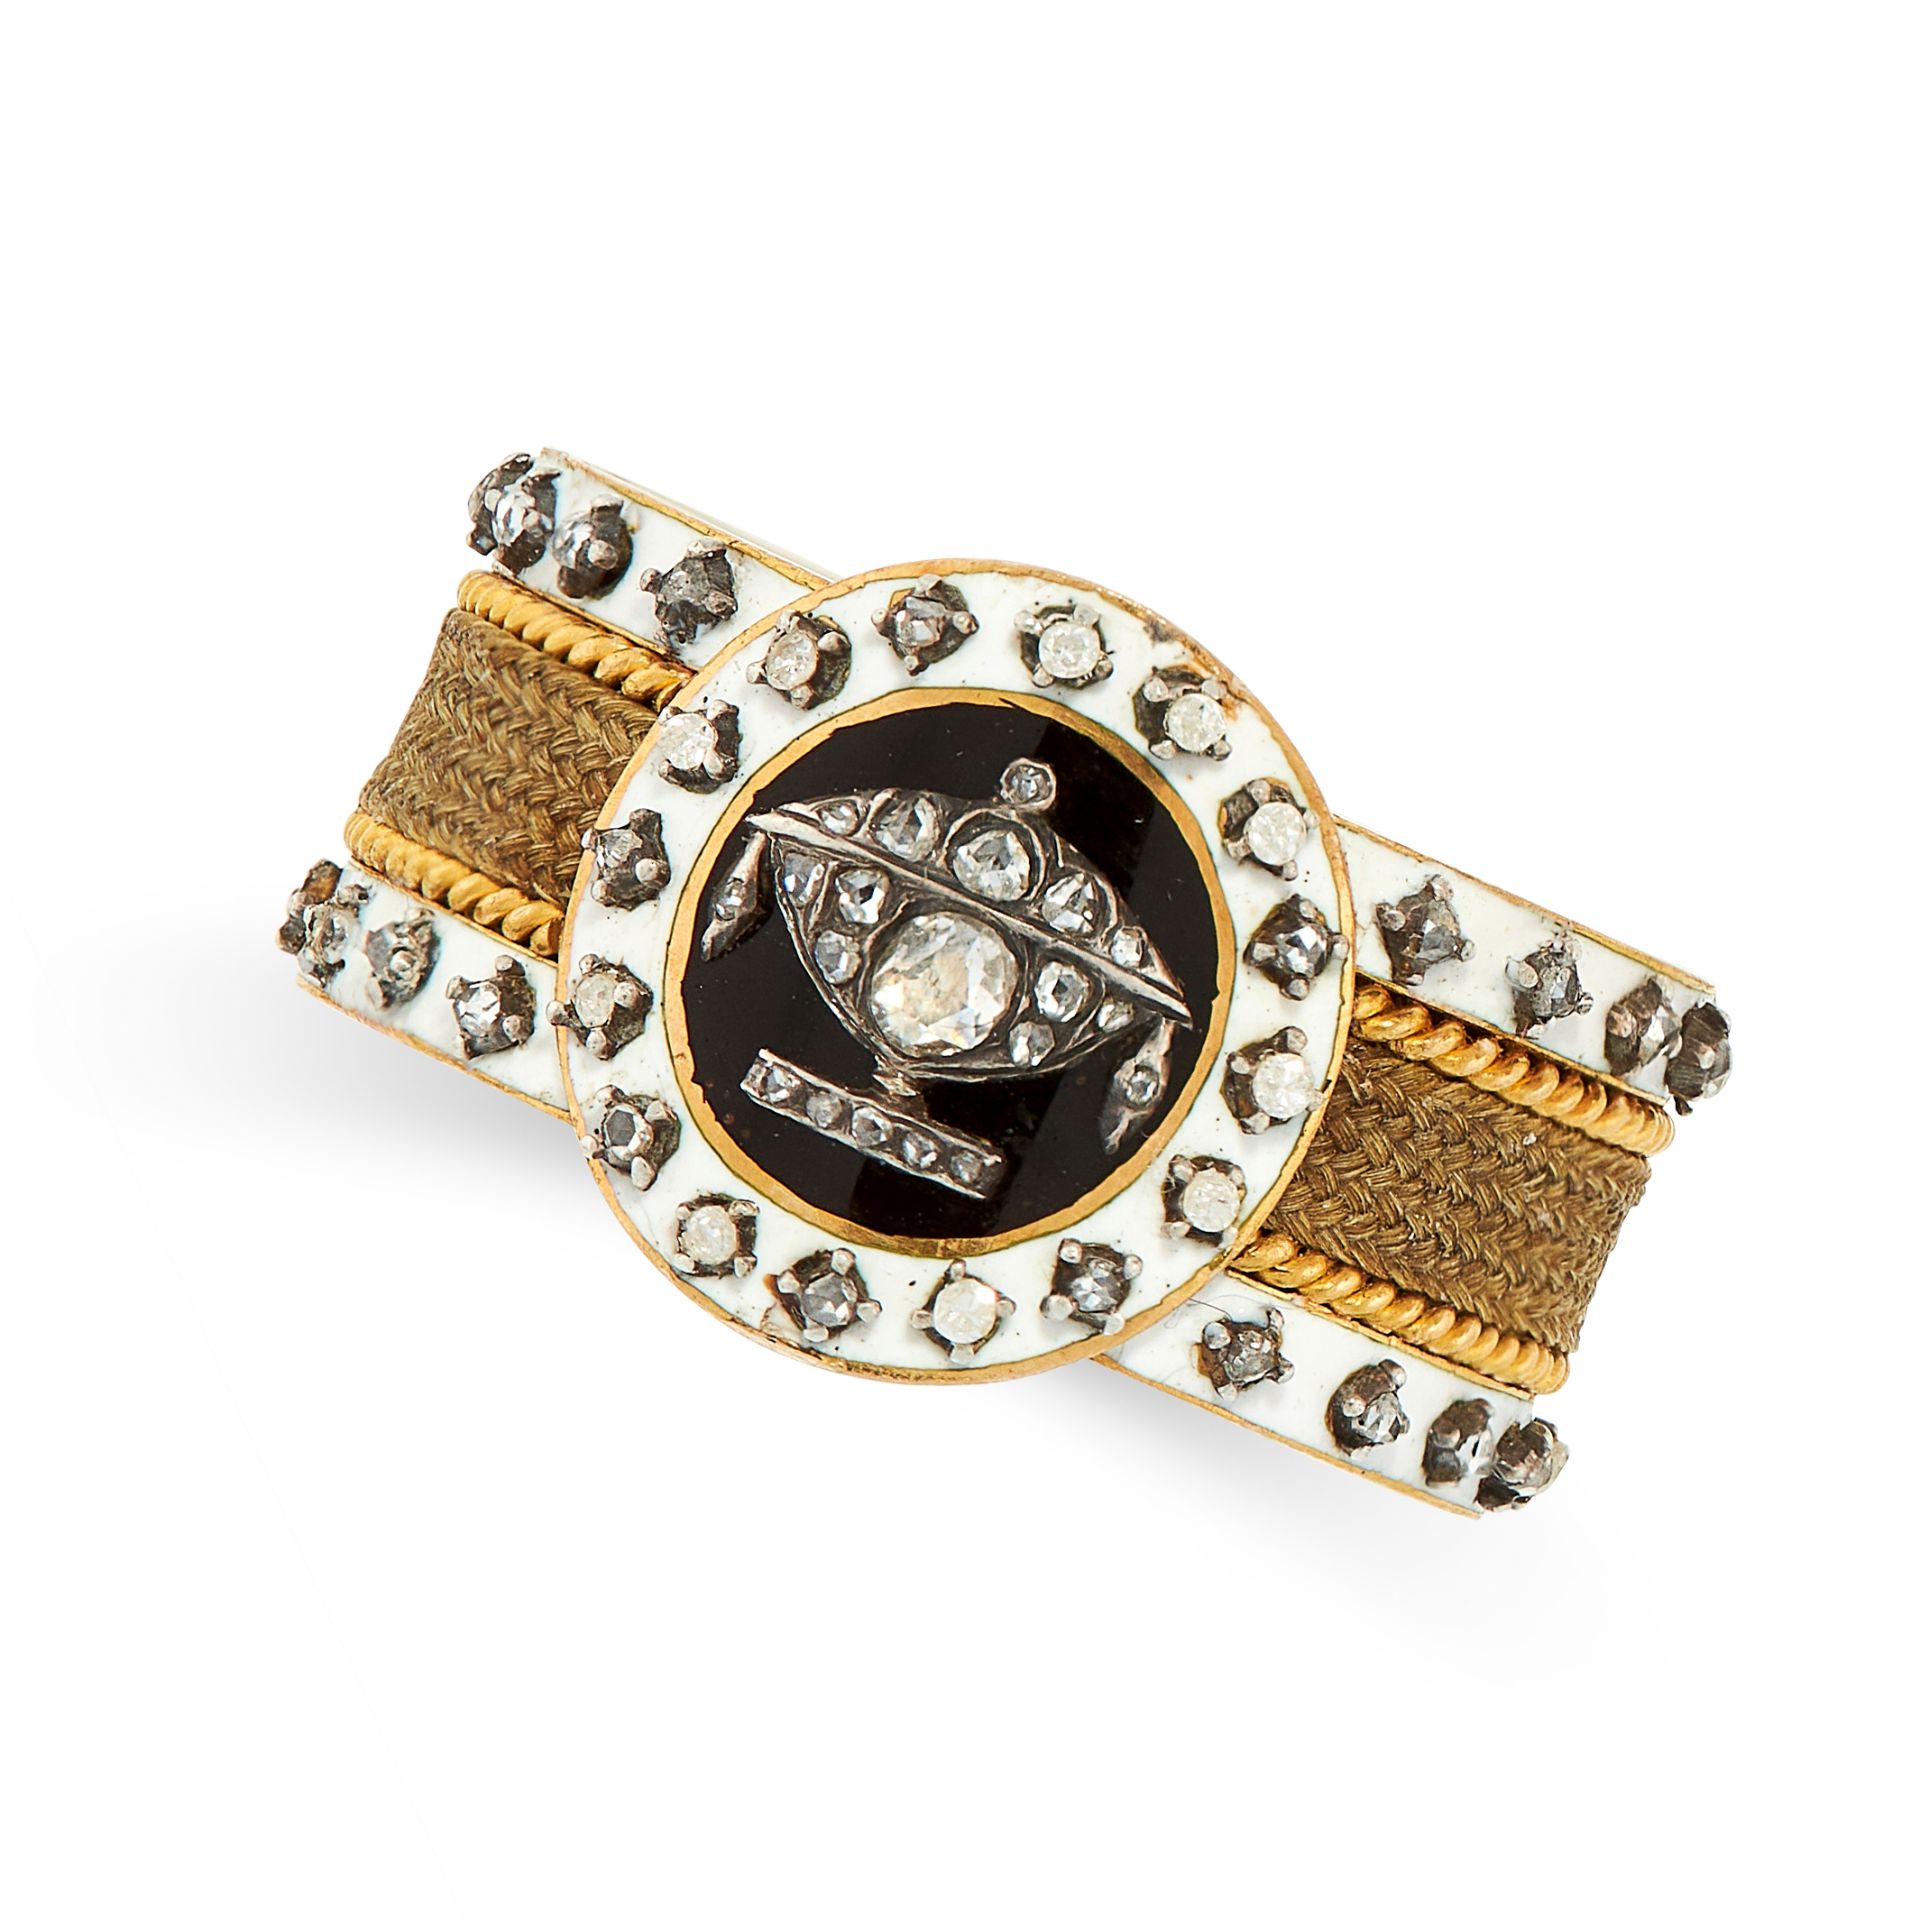 FINE ANTIQUE GEORGIAN DIAMOND, ENAMEL AND HAIRWORK MORNING RING, 1792 in 18ct yellow gold, with a